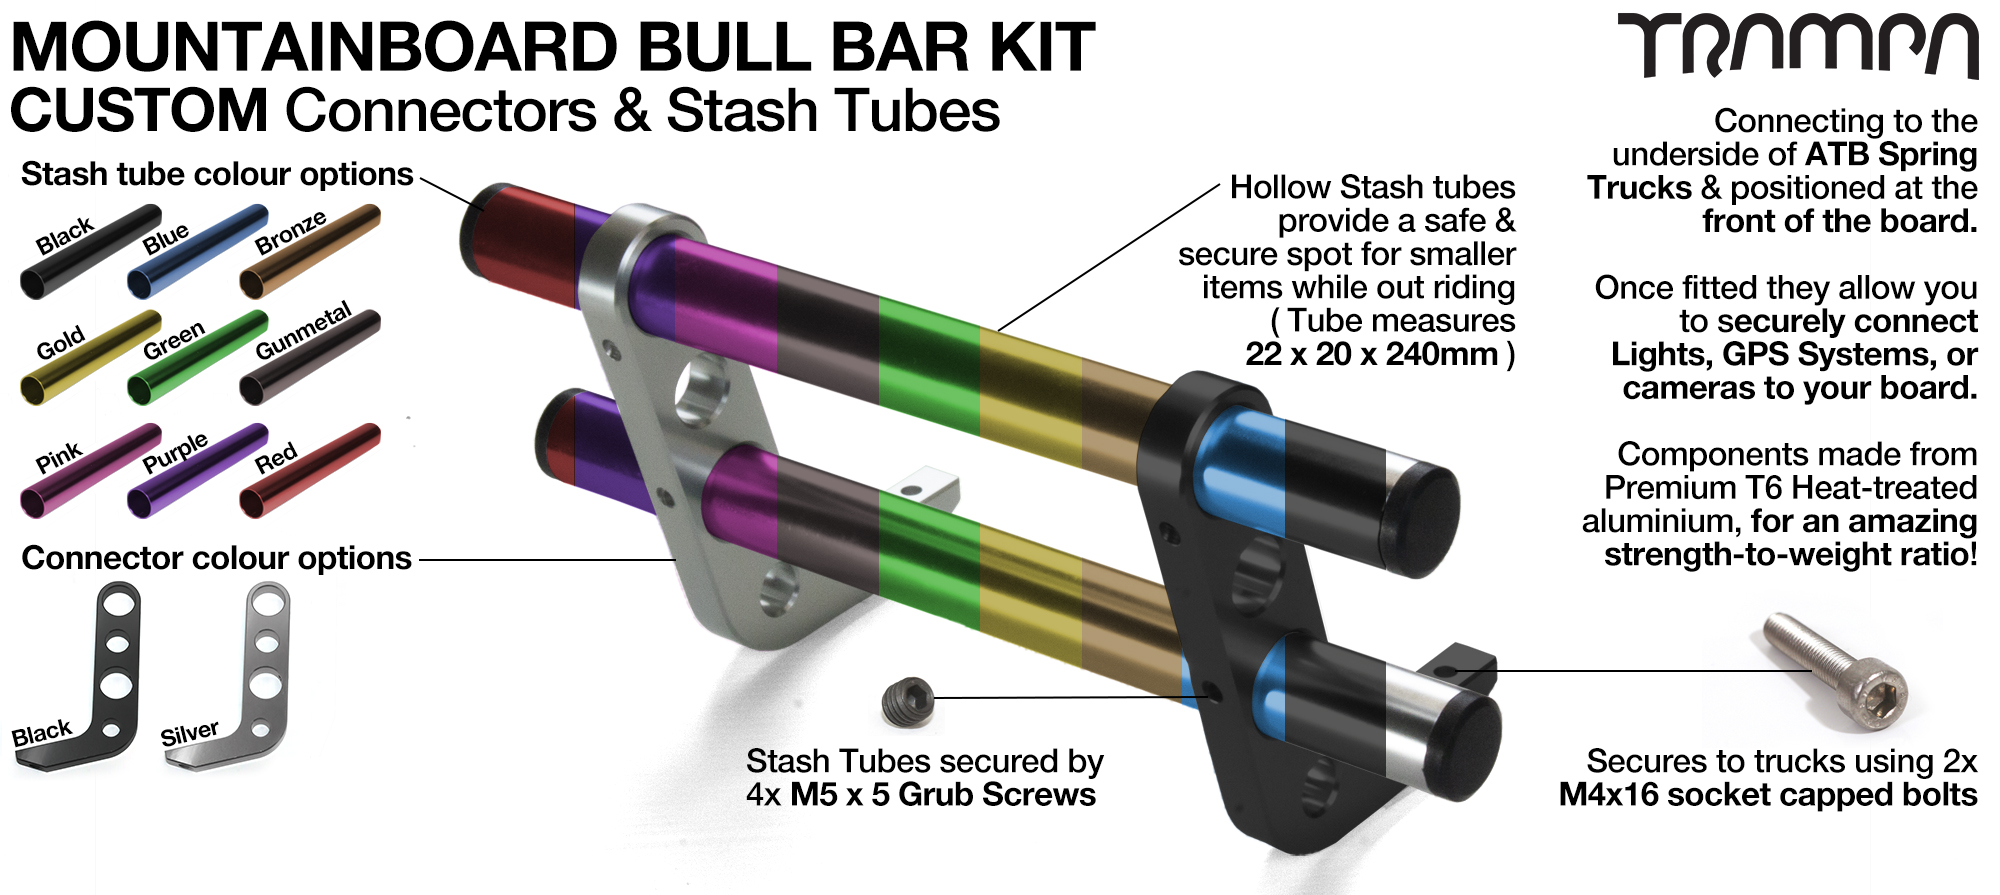 CUSTOM BULL BARS for MOUNTAINBOARDS - T6 Heat Treated CNC'd Aluminium Uprights, with Hollow Aluminium Stash Tubes with Rubber end bungs